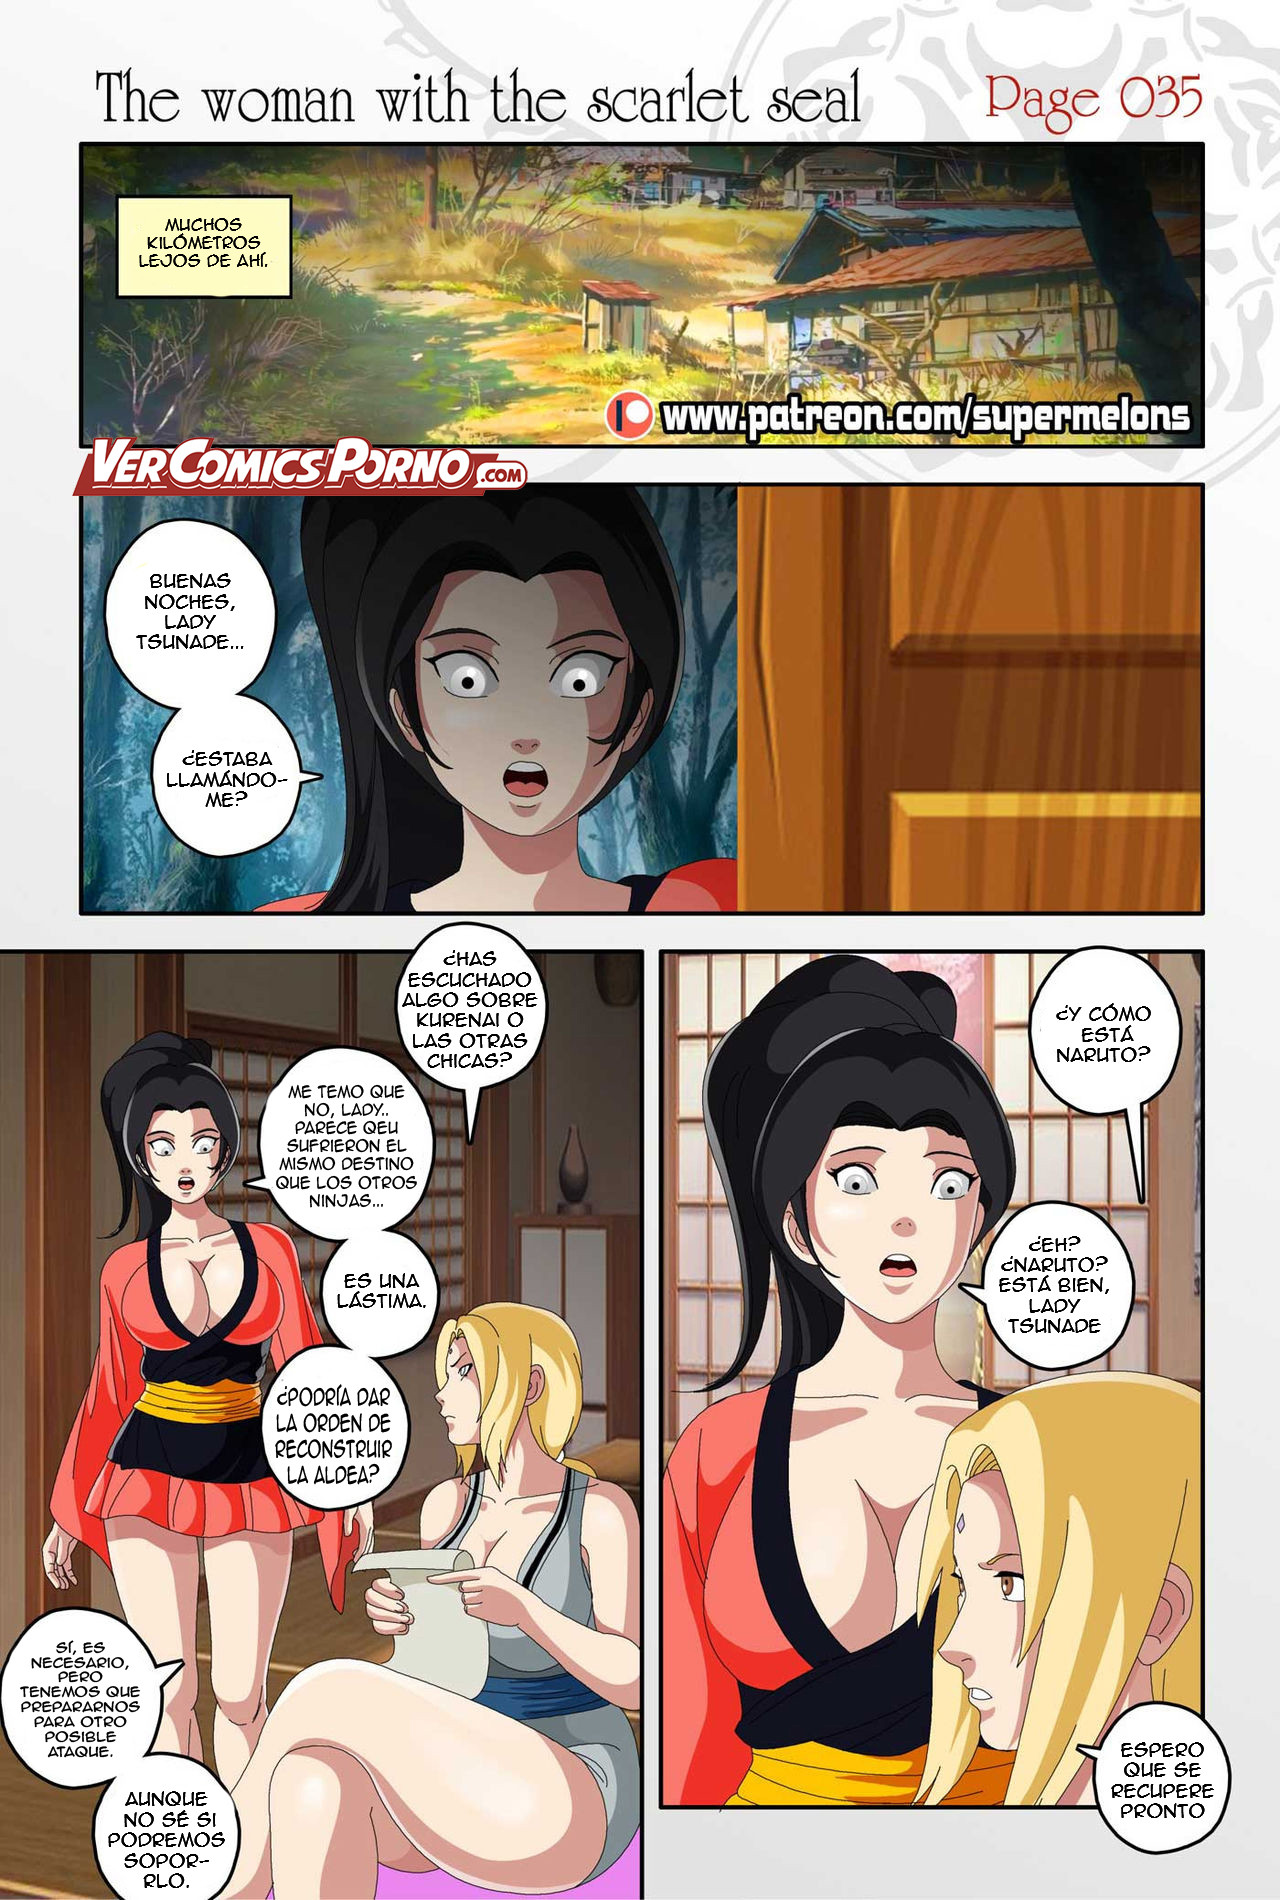 [Super Melons] The Woman with the Scarlet Seal (Traduccion Exclusiva) - 35